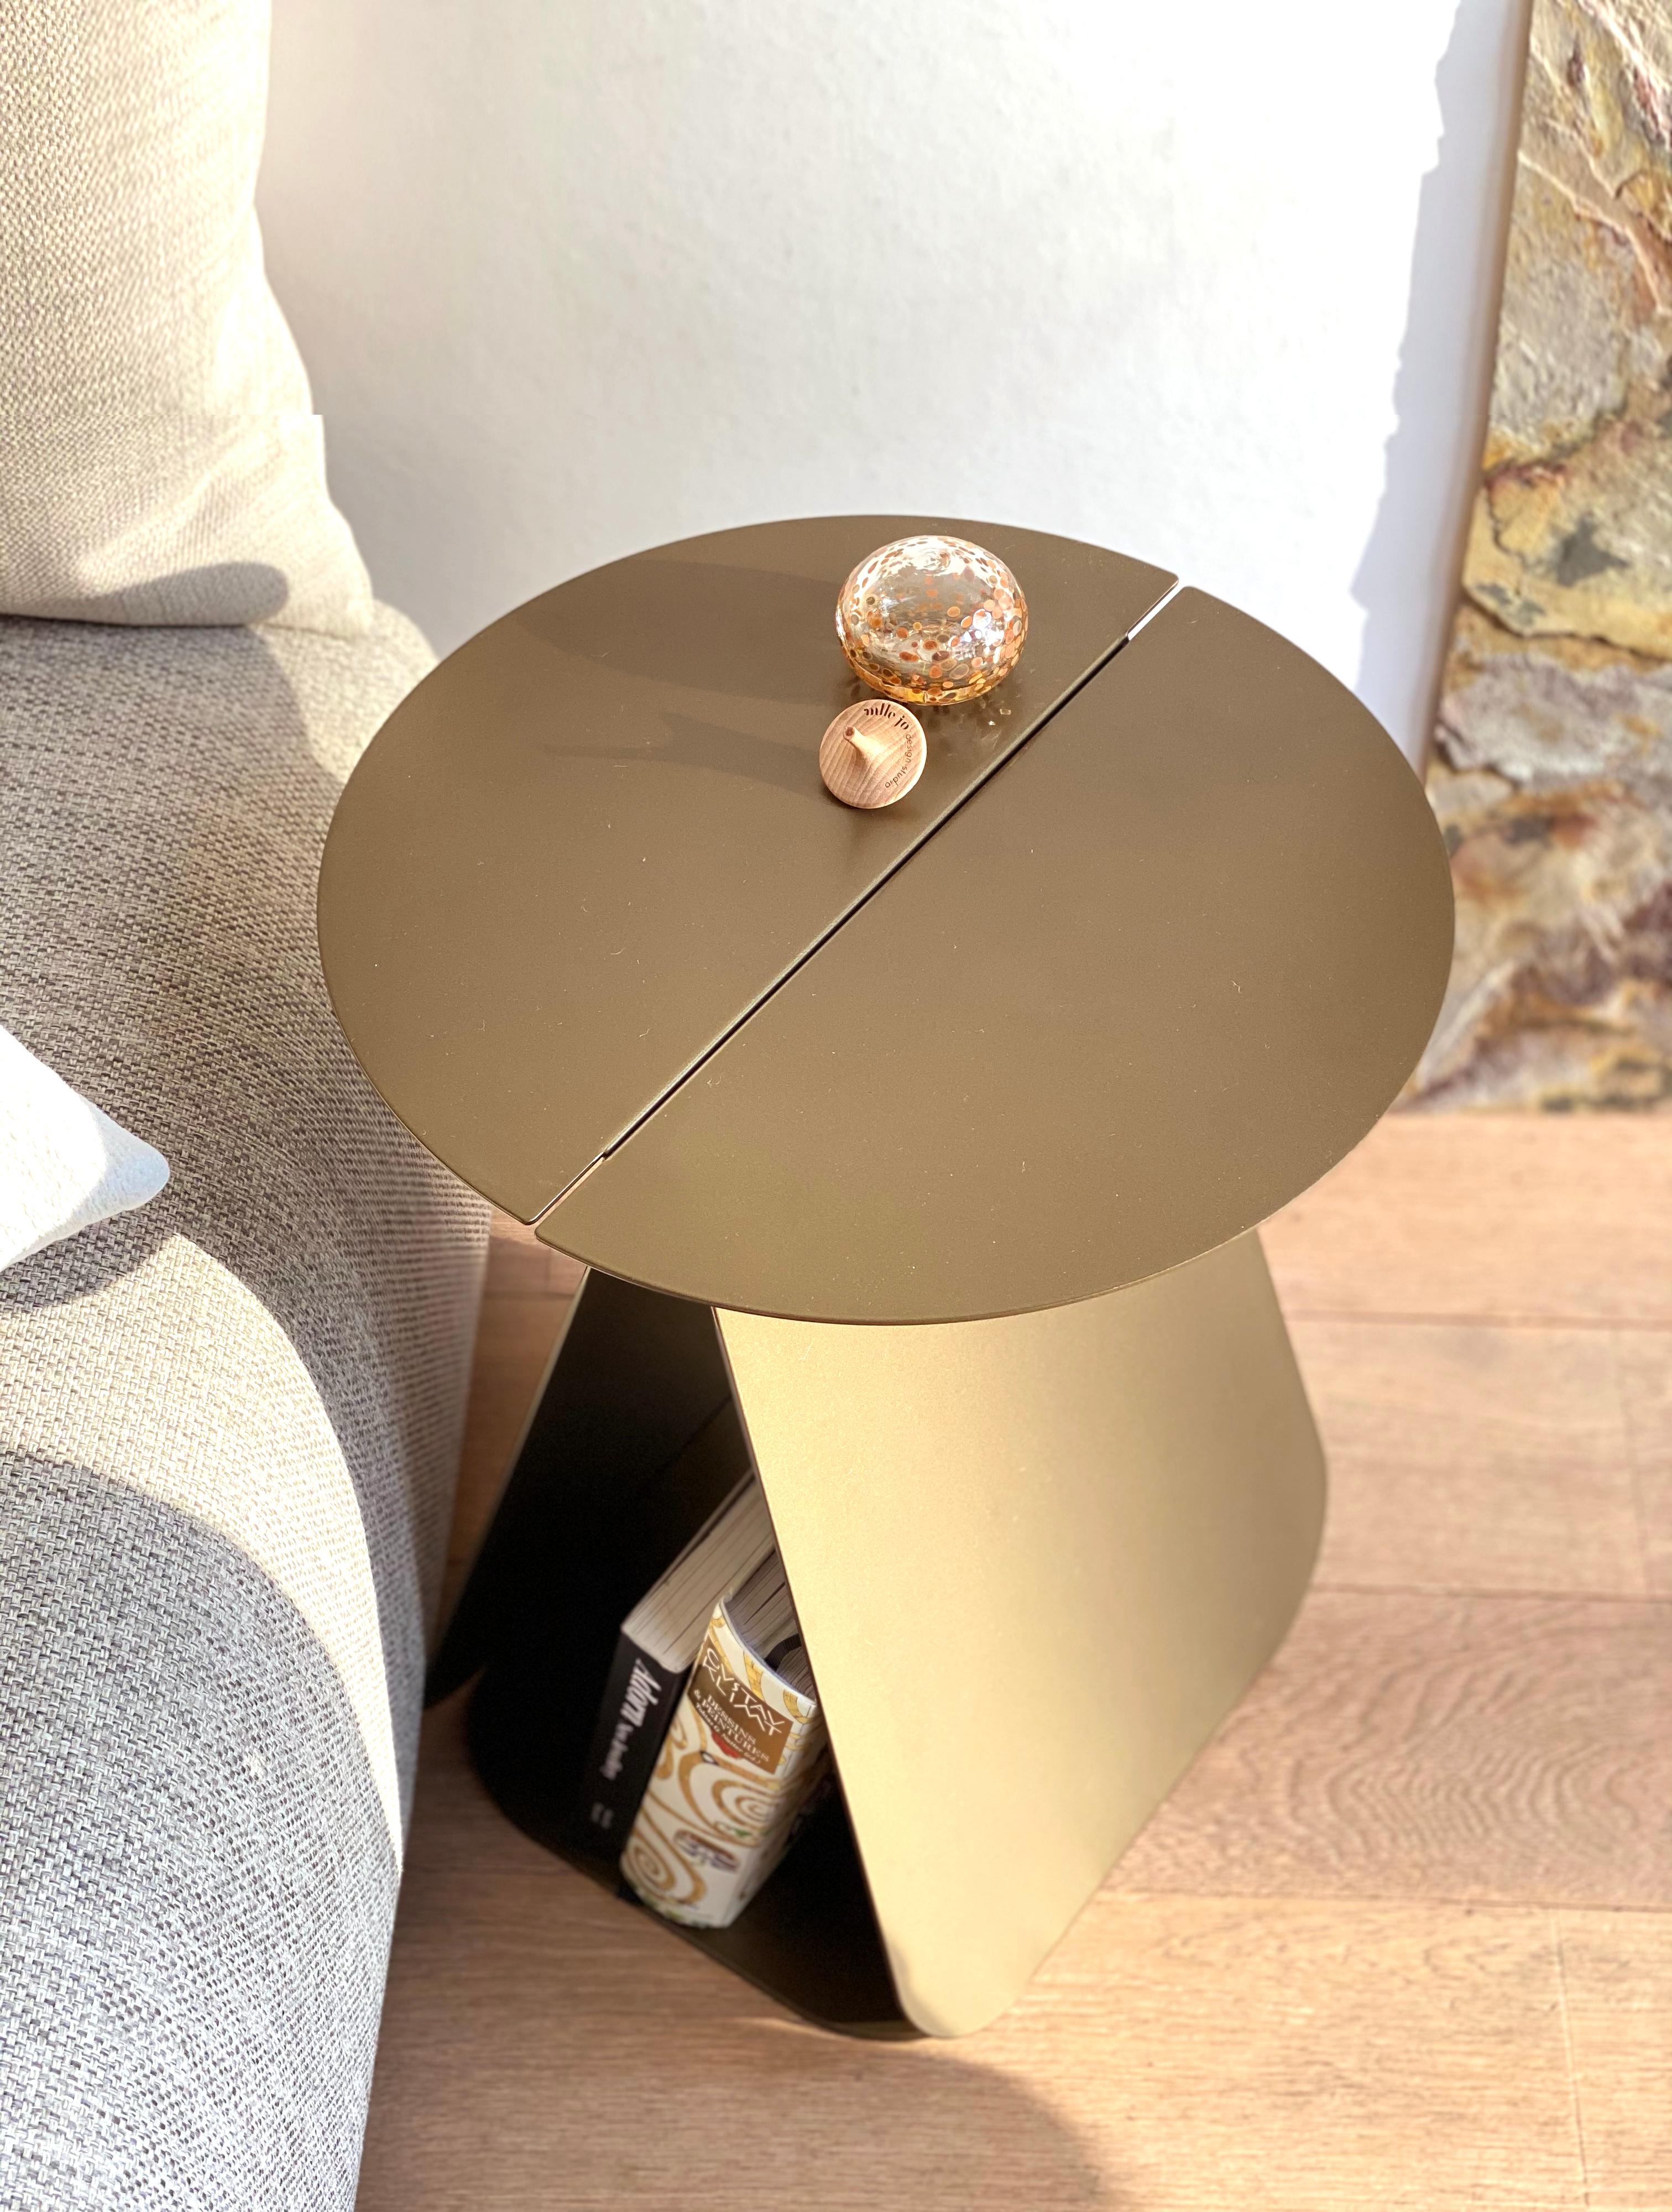 YOUMY Round Bronze Table by Mademoiselle Jo
Dimensions: Ø 36 x H 43 cm.
Materials: Bronze.

Also available in different colors and finishes. Round symmetrical or rectangular asymmetrical version. Available in two versions and several colors. Please